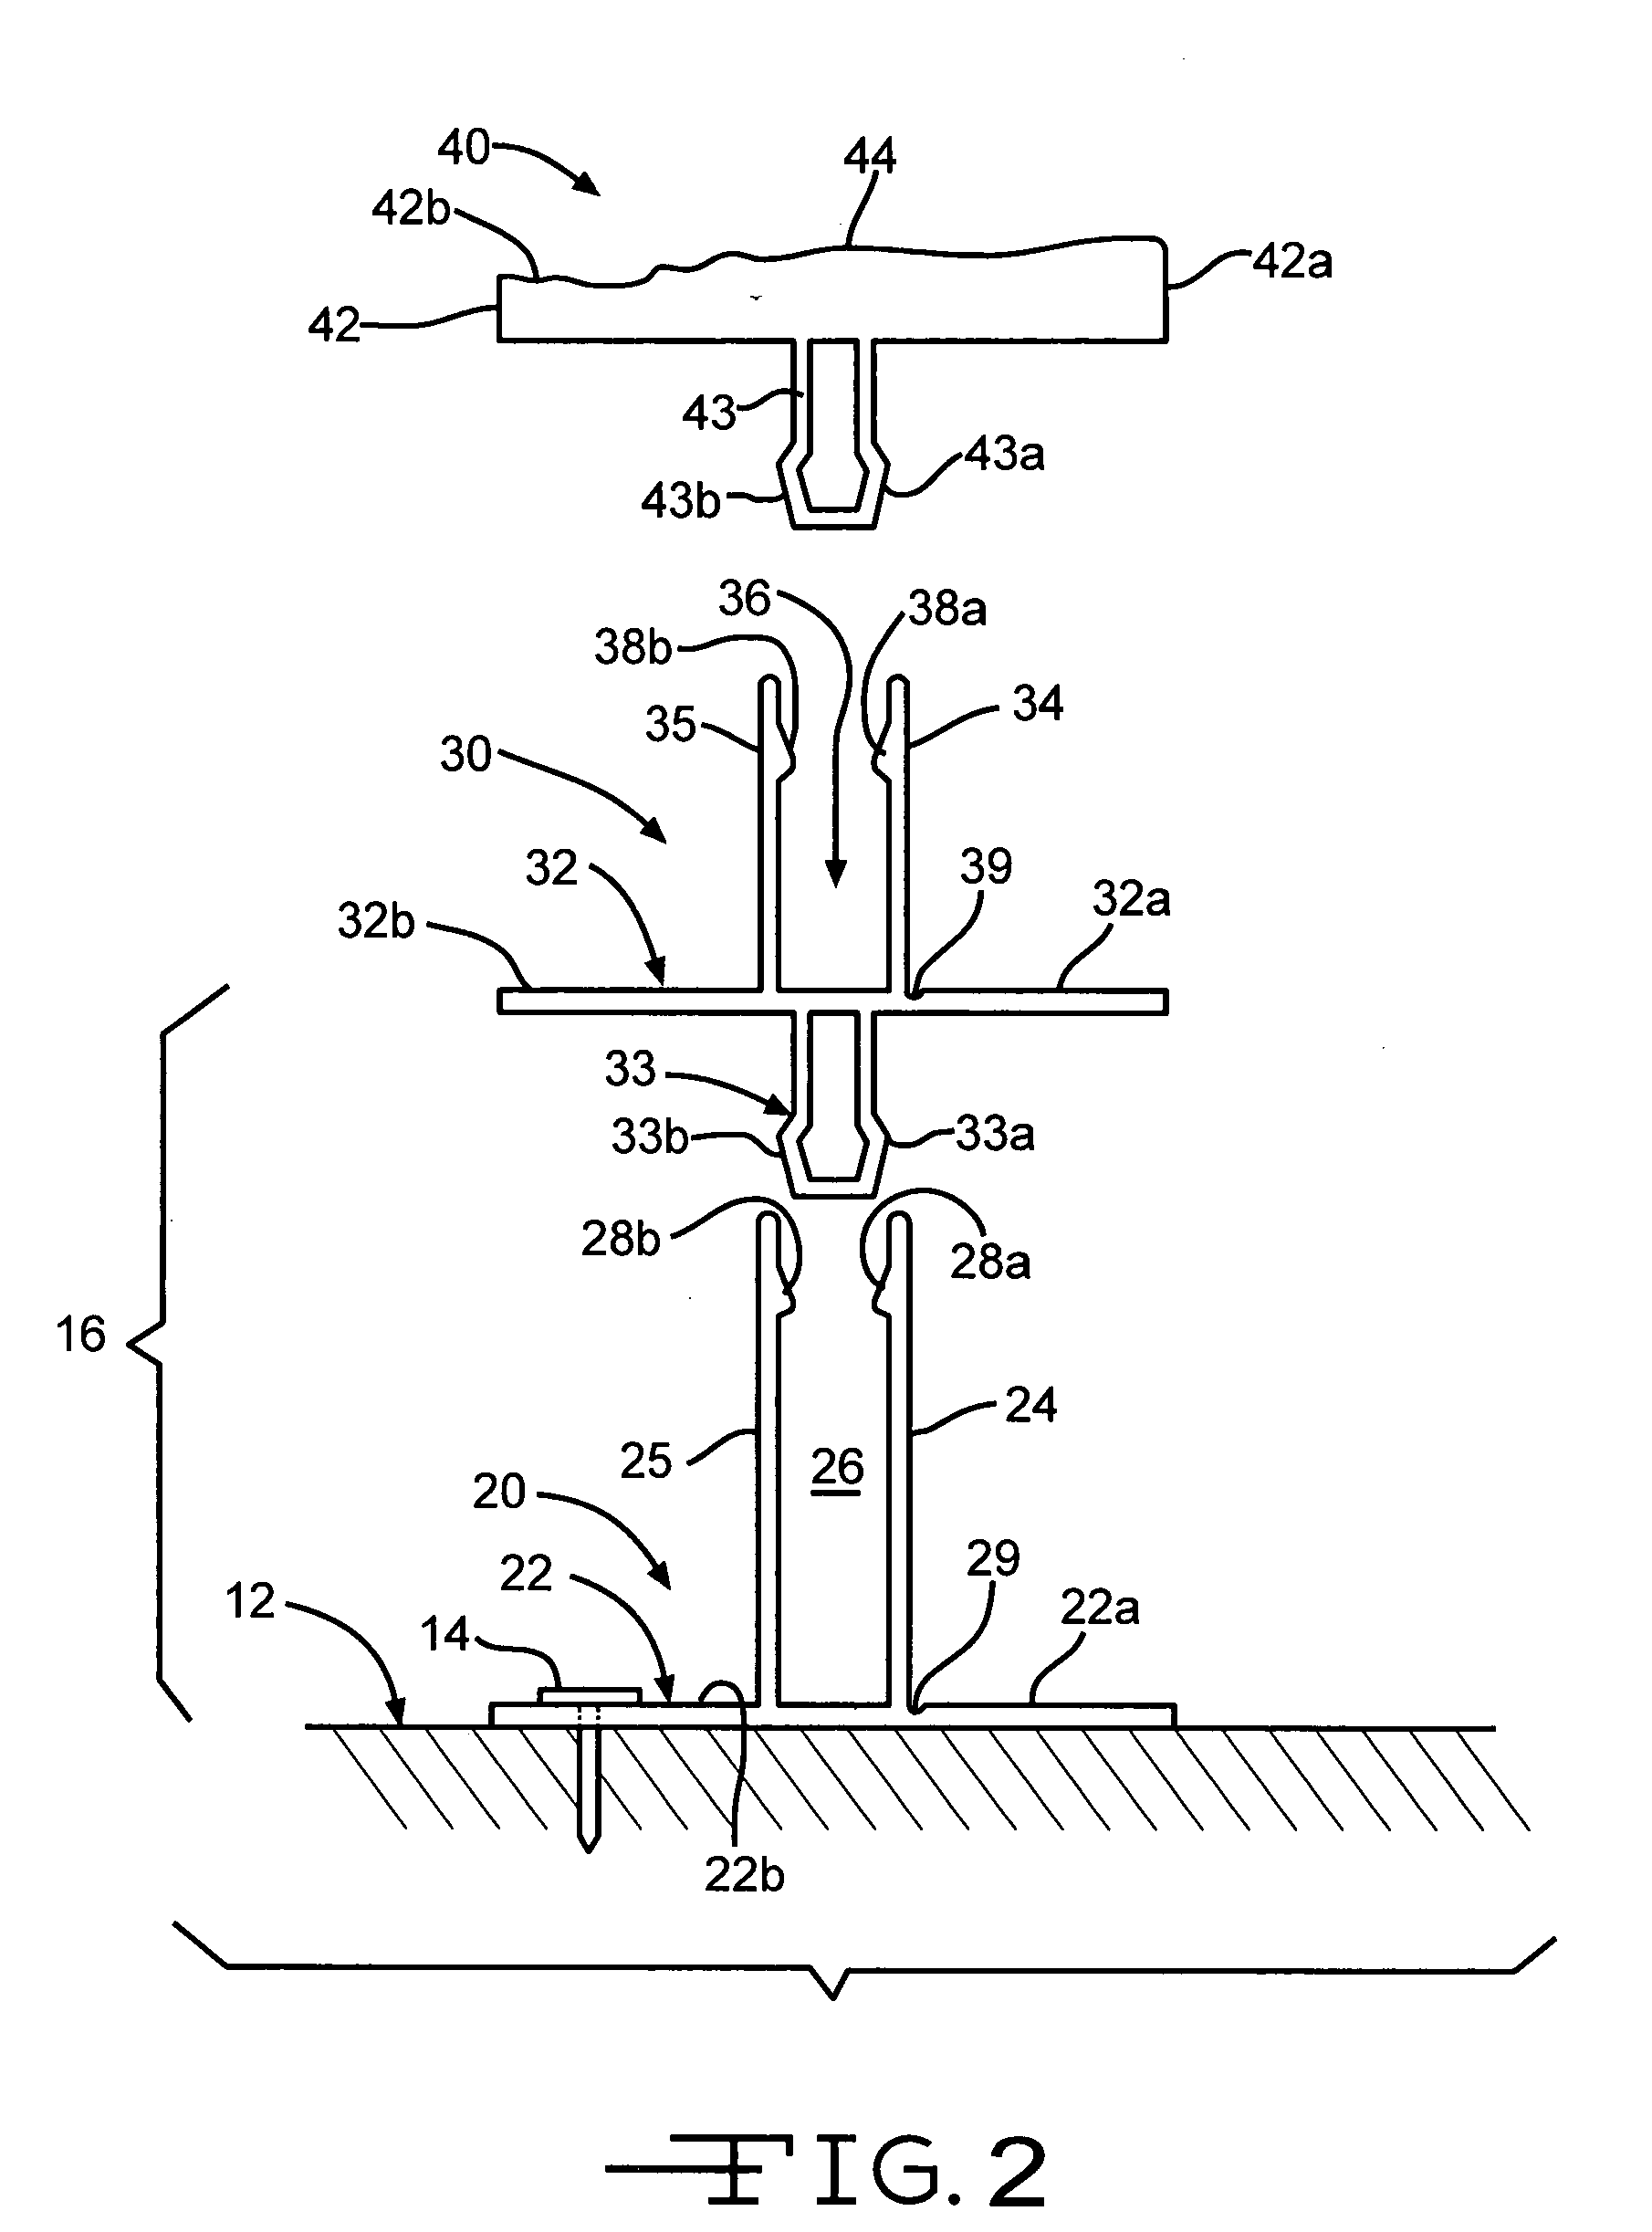 Insulation system for building structures